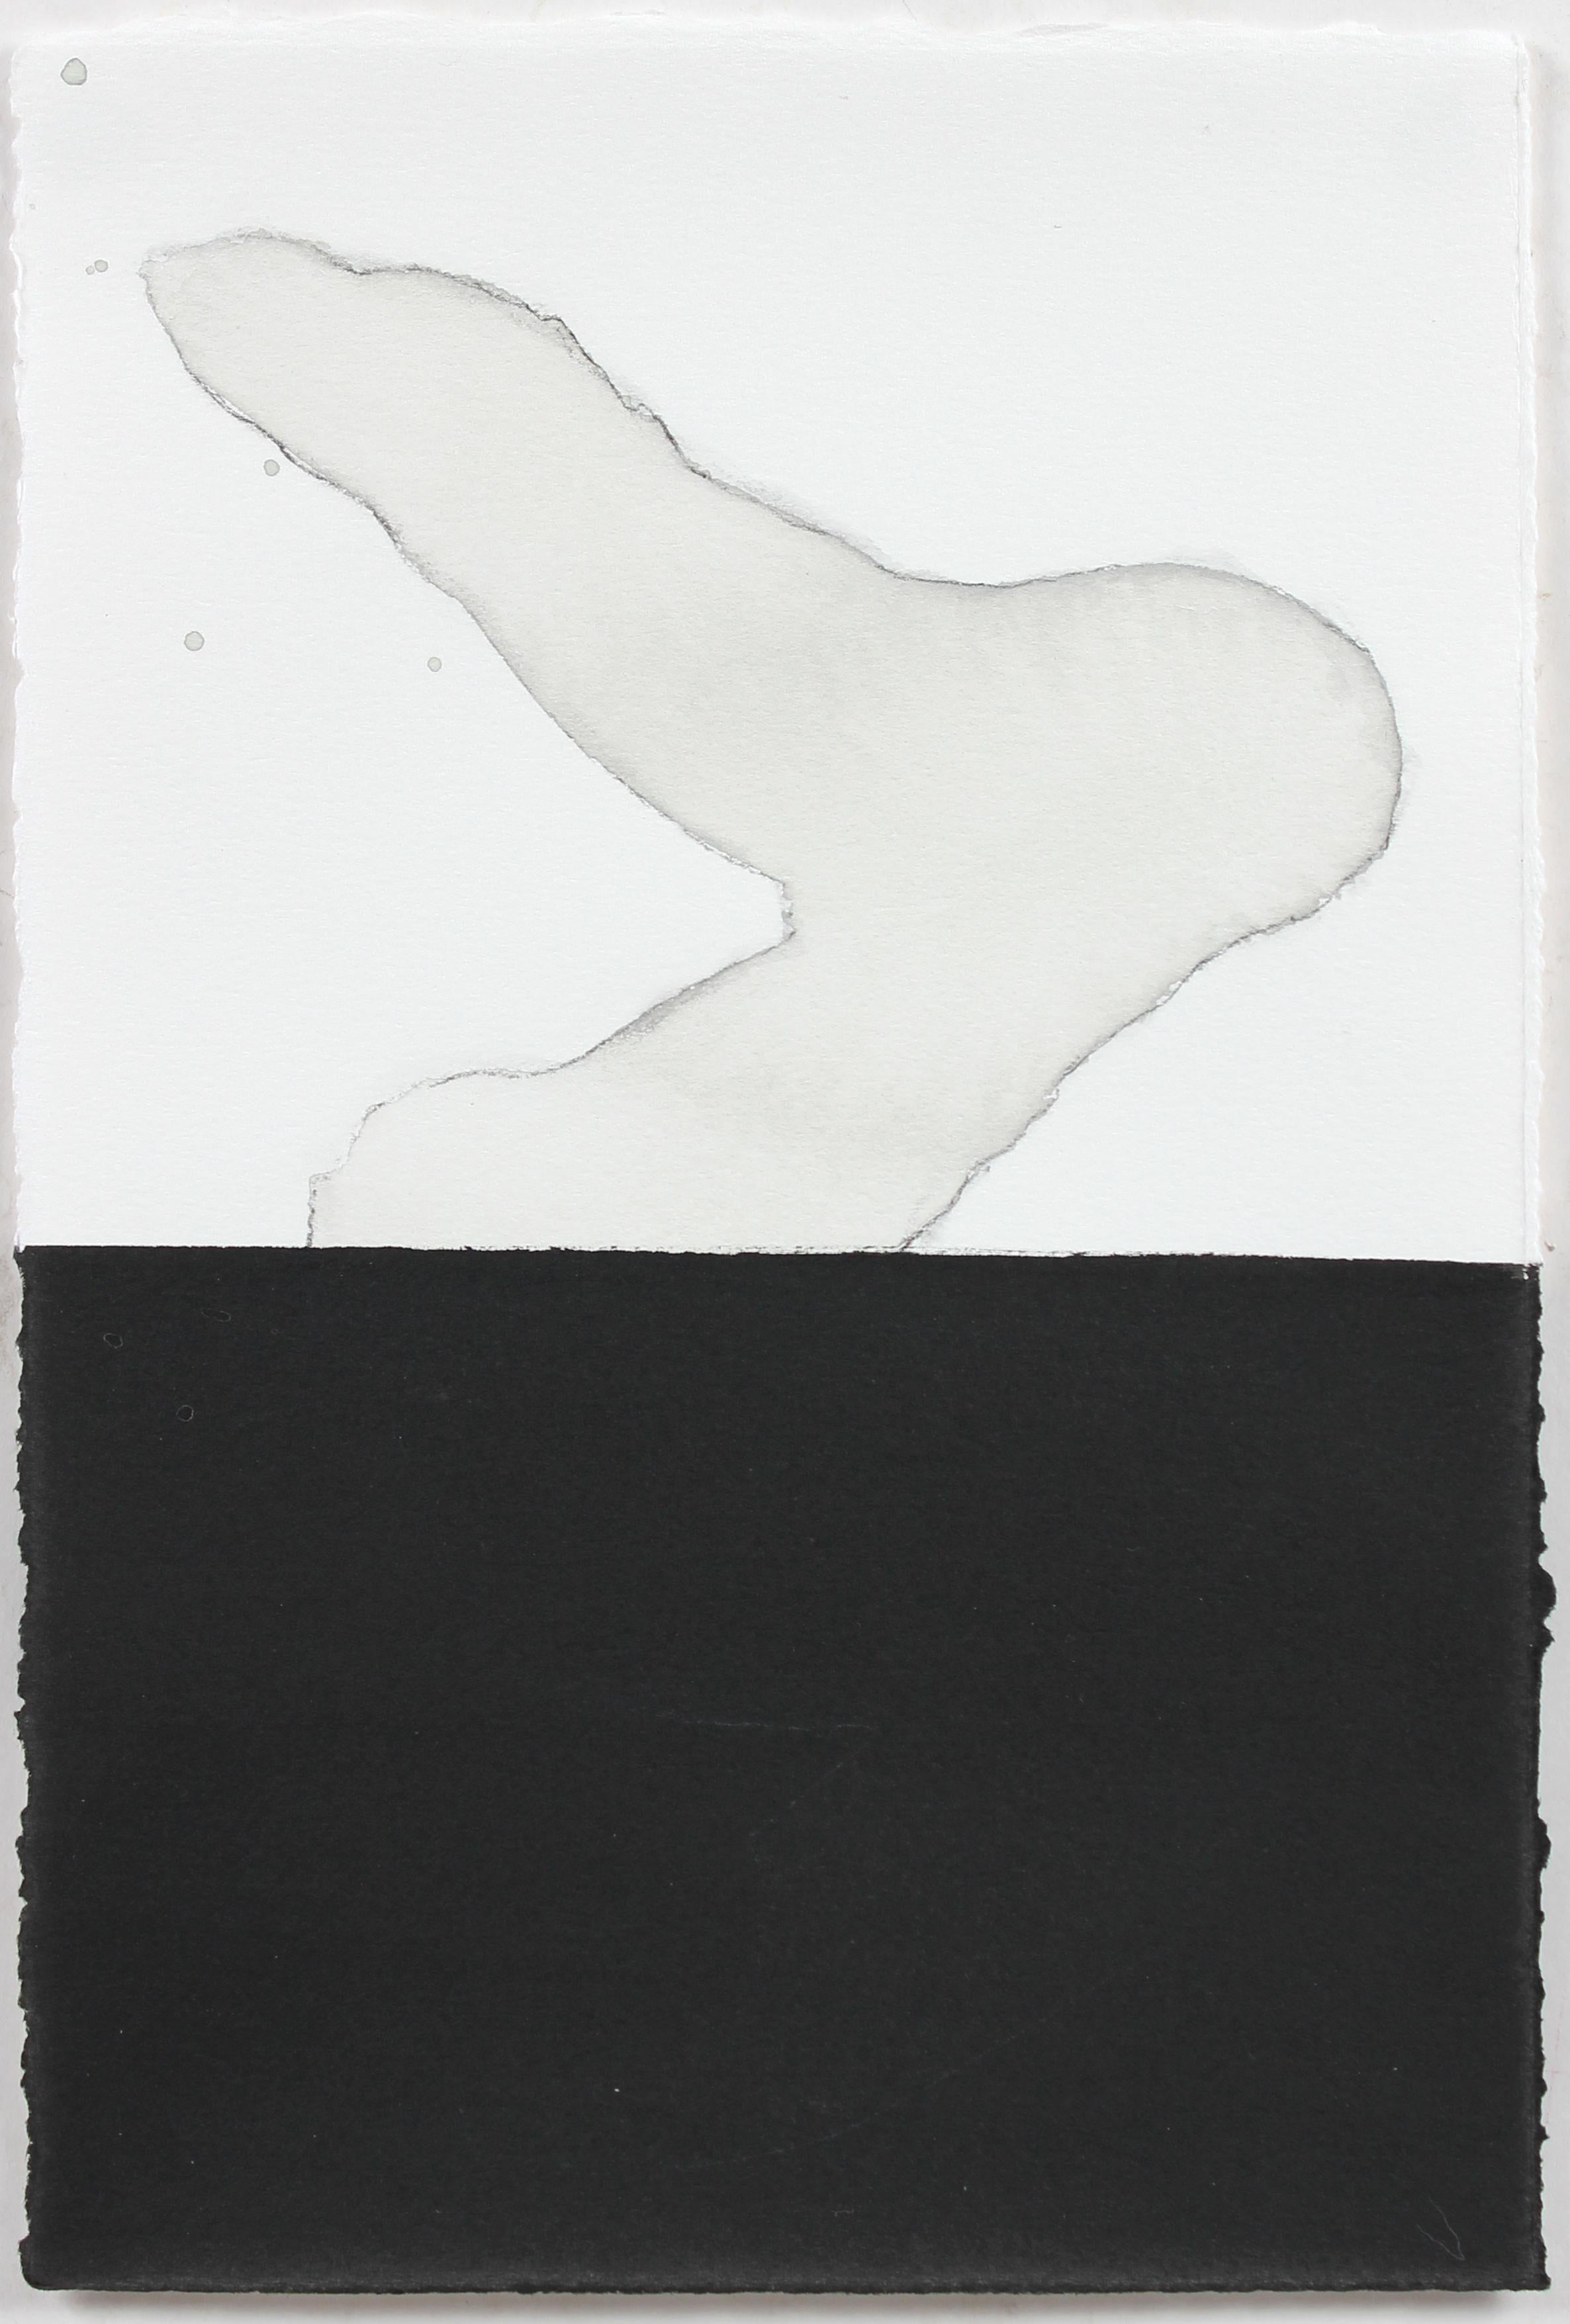 Rob Delamater Abstract Drawing - "Cumulus V" Ink & Charcoal Abstract in Black, 2017